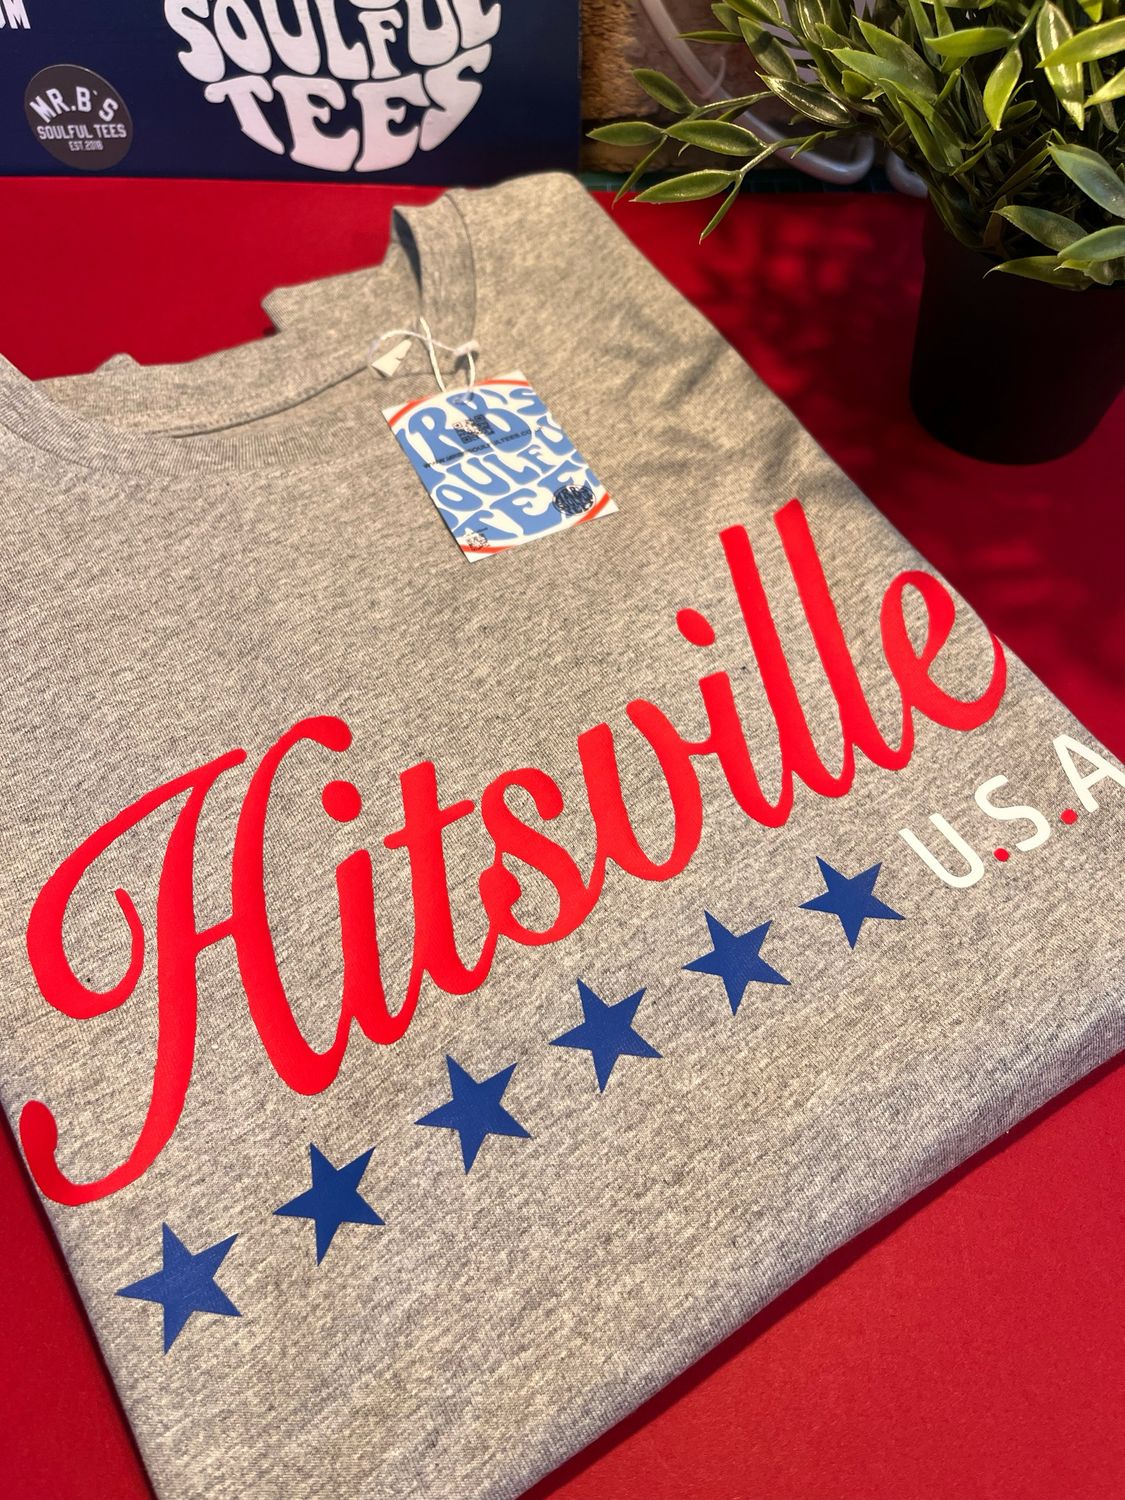 Hitsville usa Organic cotton T shirt,also available in long sleeve or sweatshirt